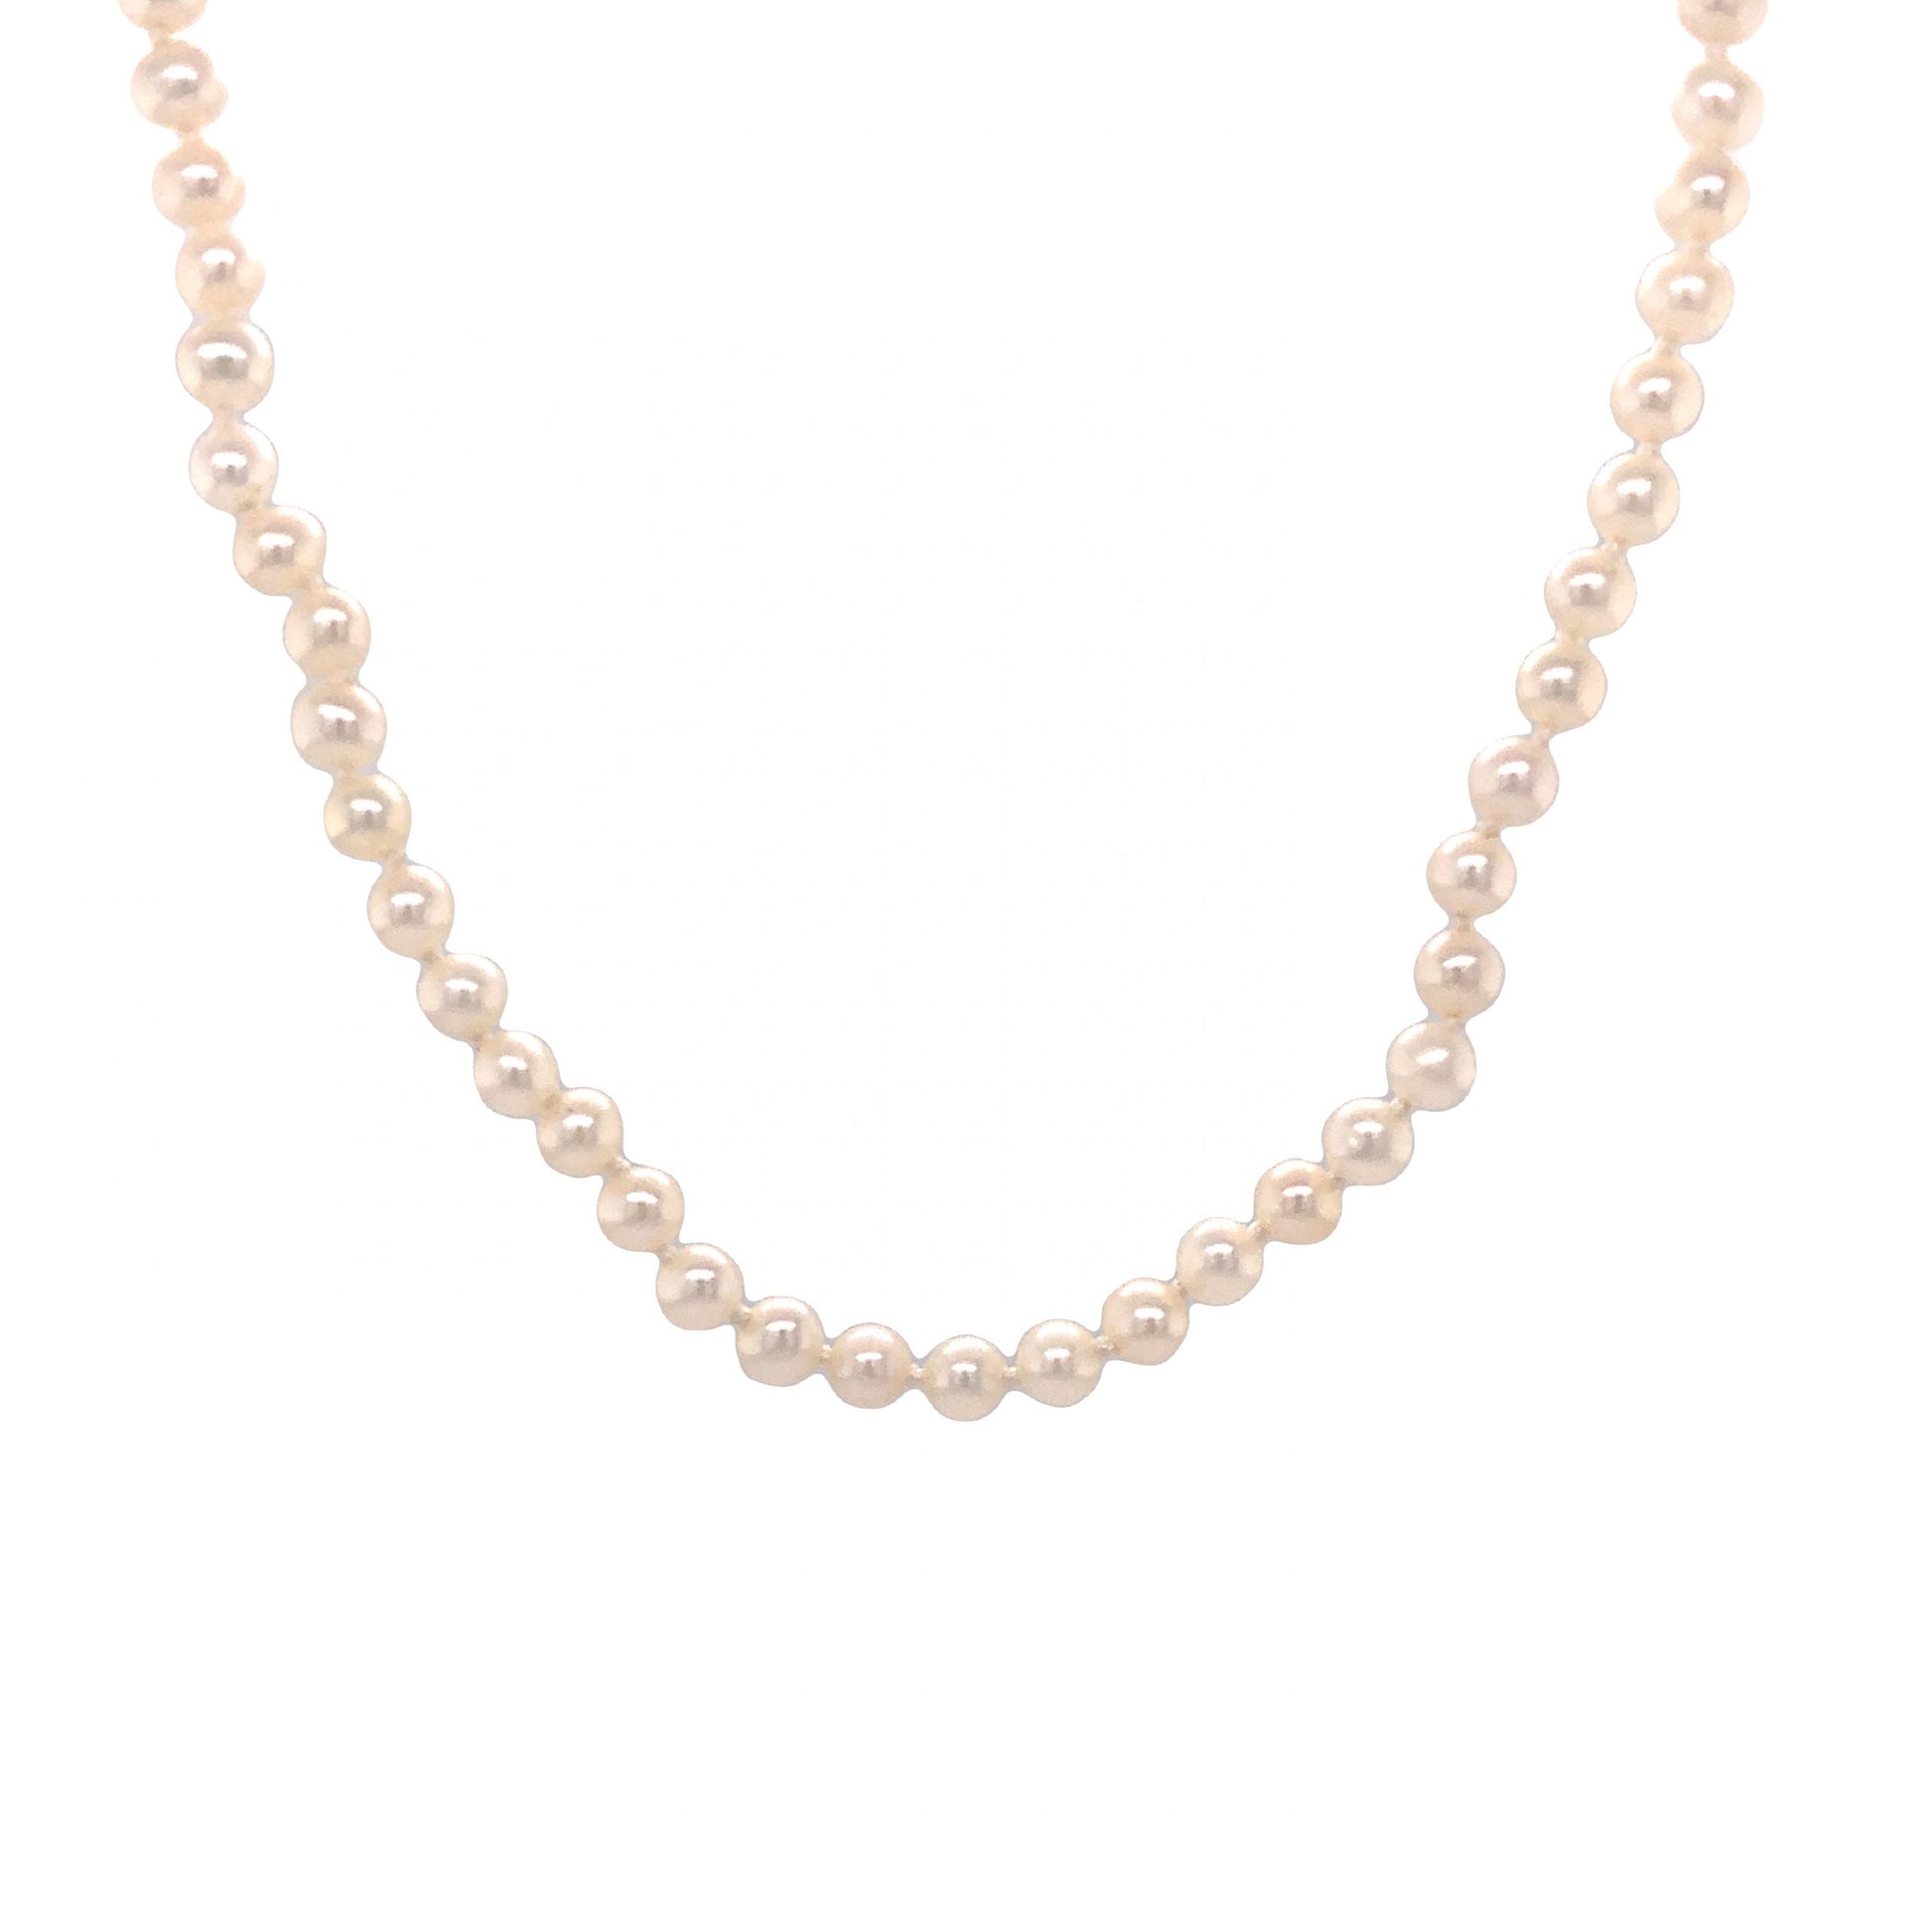 16 Inch Pearl Necklace w/ 14k White Gold ClaspComposition: 14 Karat White Gold Total Gram Weight: 6.3 g Inscription: 585
      